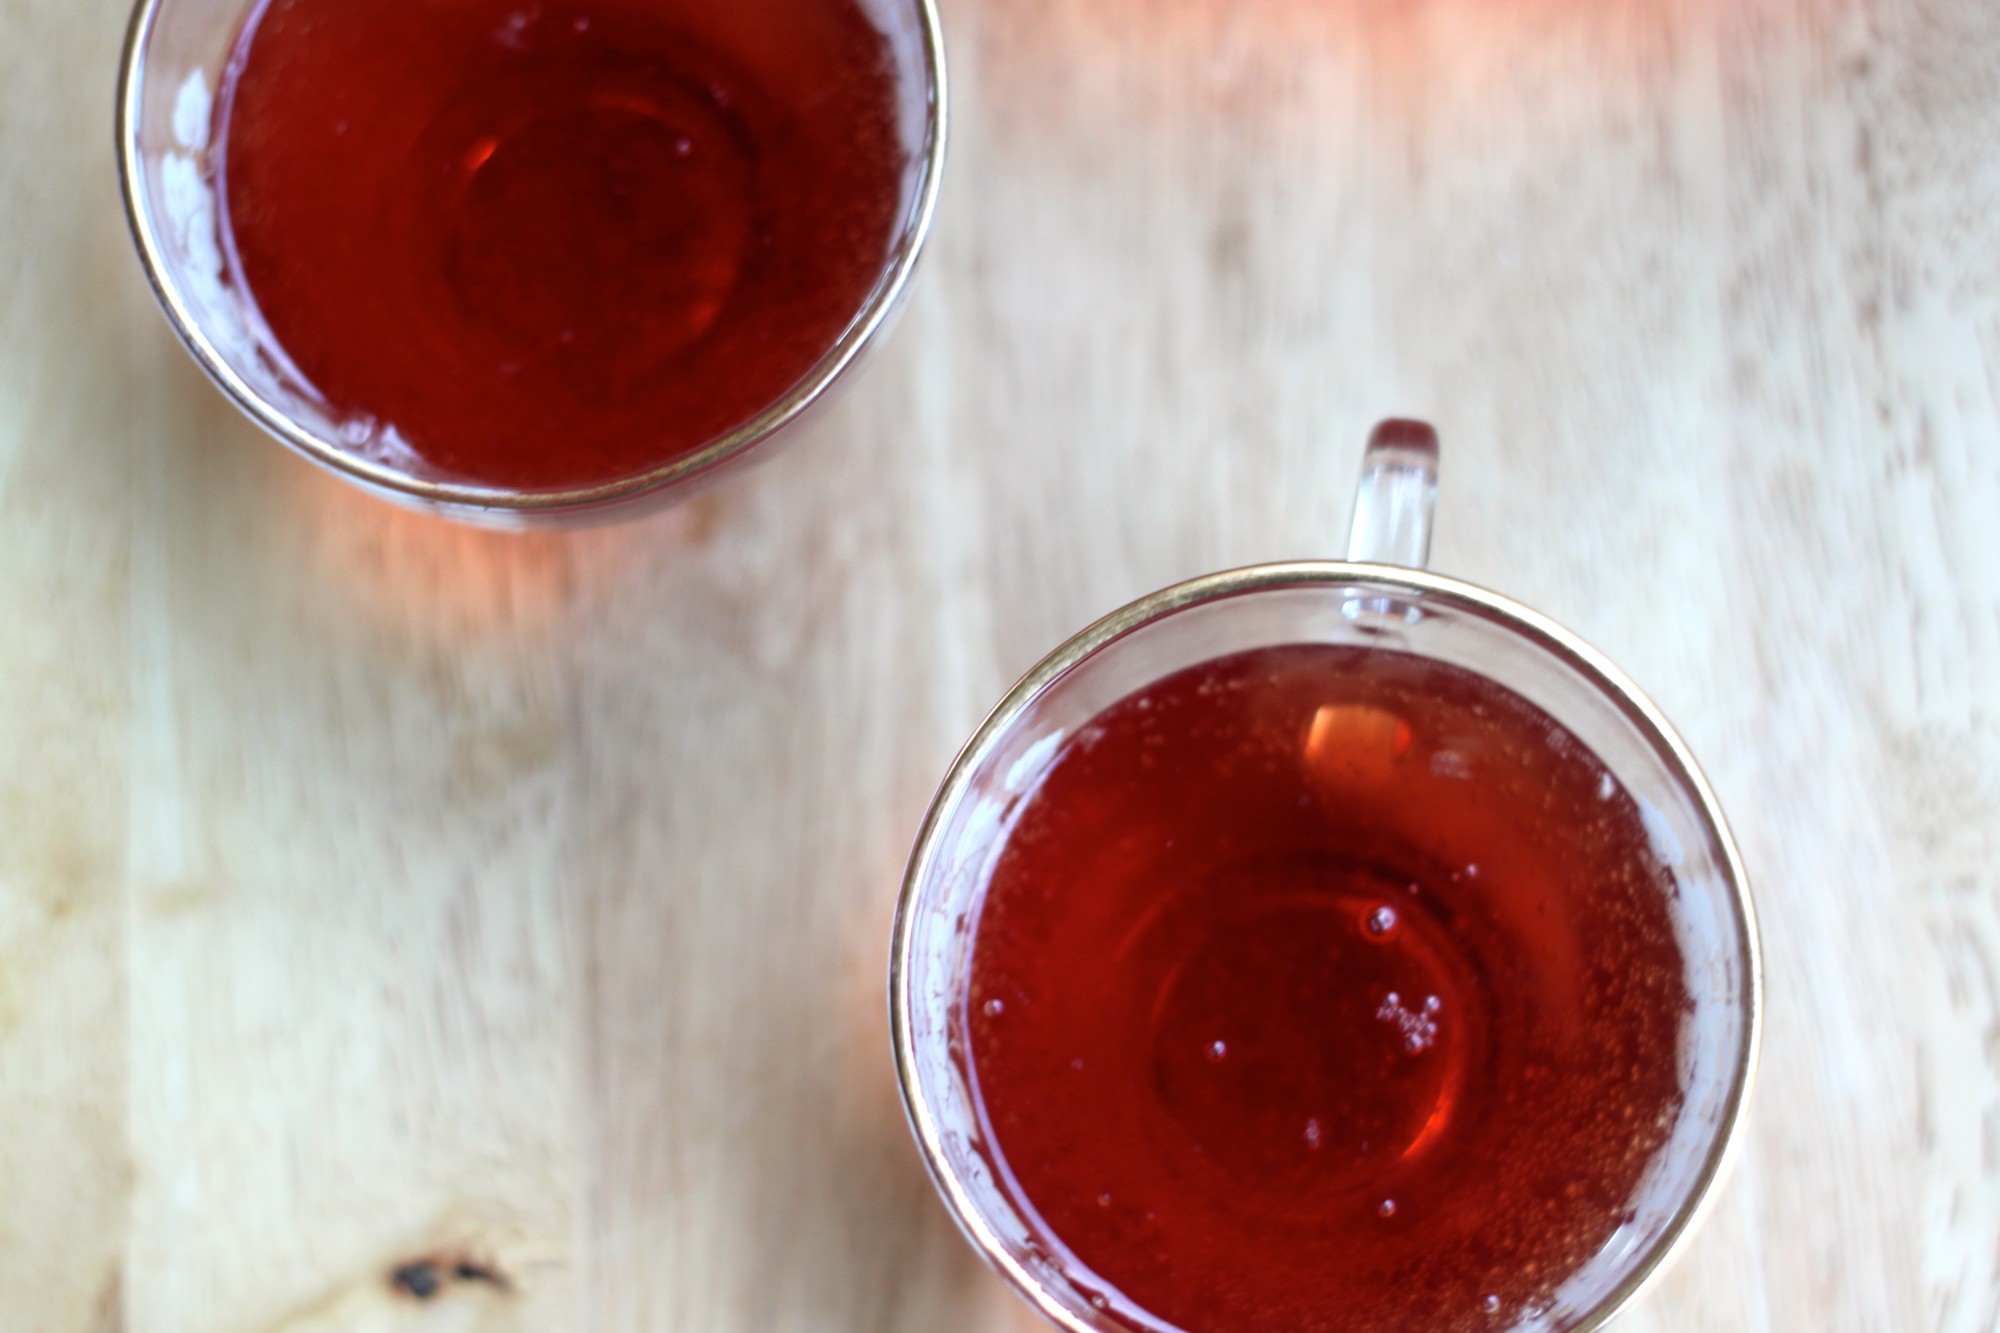 National Champagne Day | Cranberry Champagne Punch